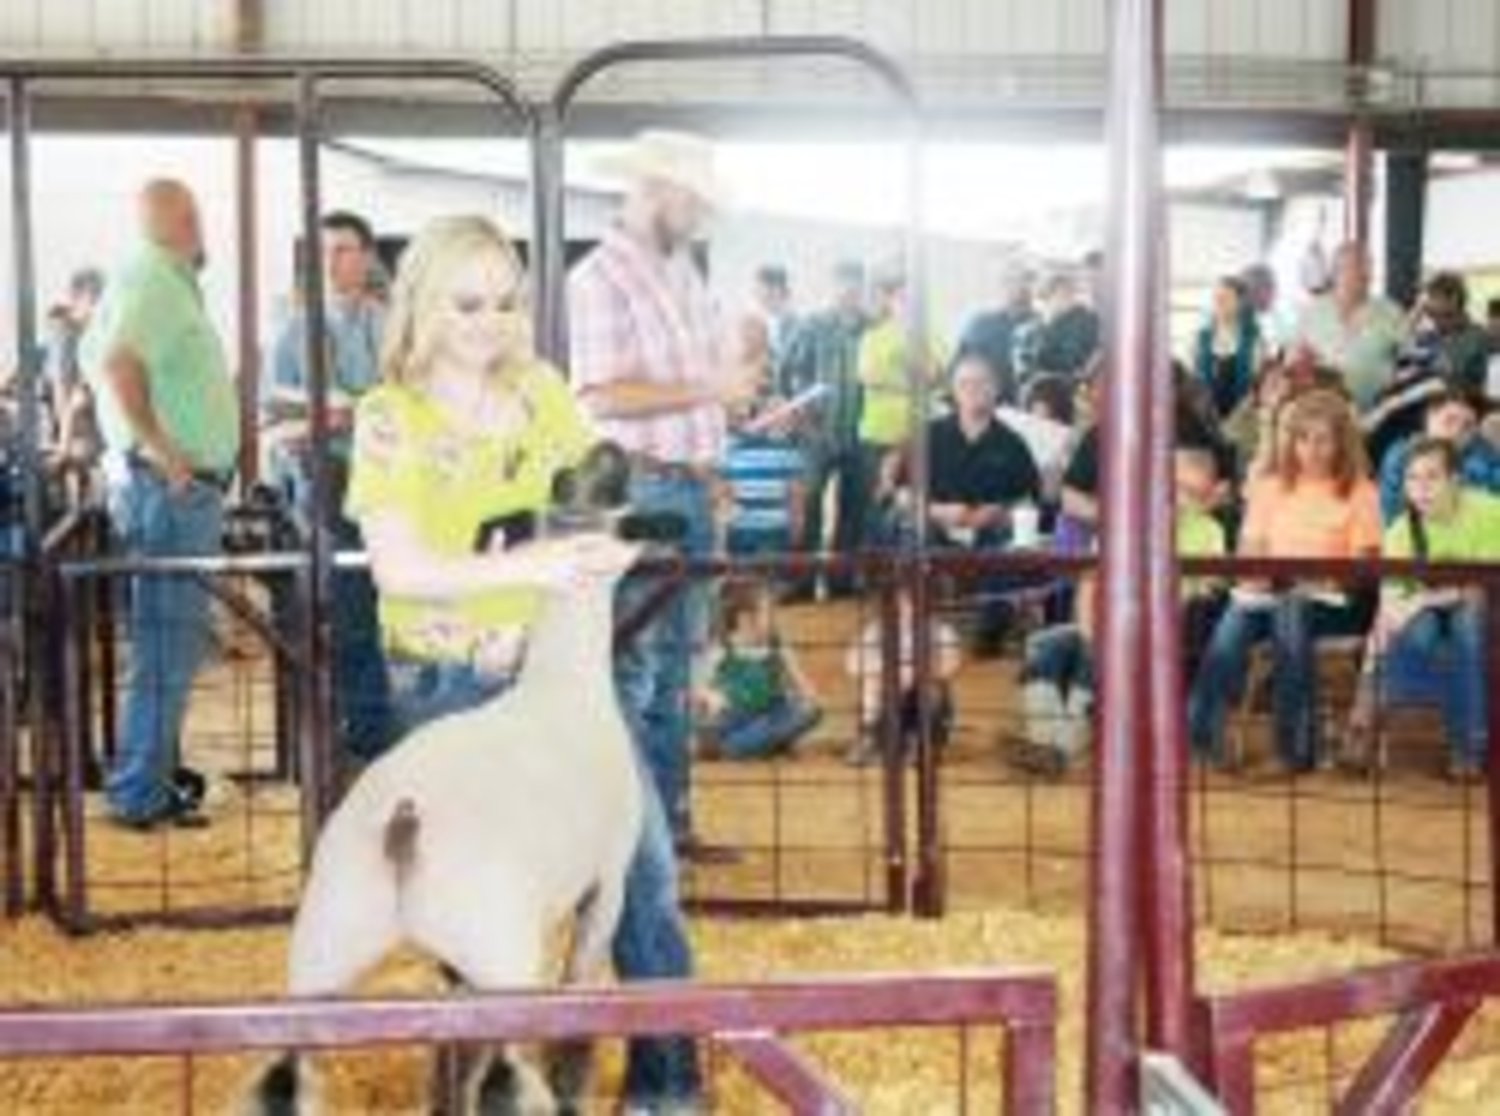 Yantis FFA member Gracie Beech is shown here with her Reserve Champion Lamb at Saturday's Wood County Junior Livestock Show.